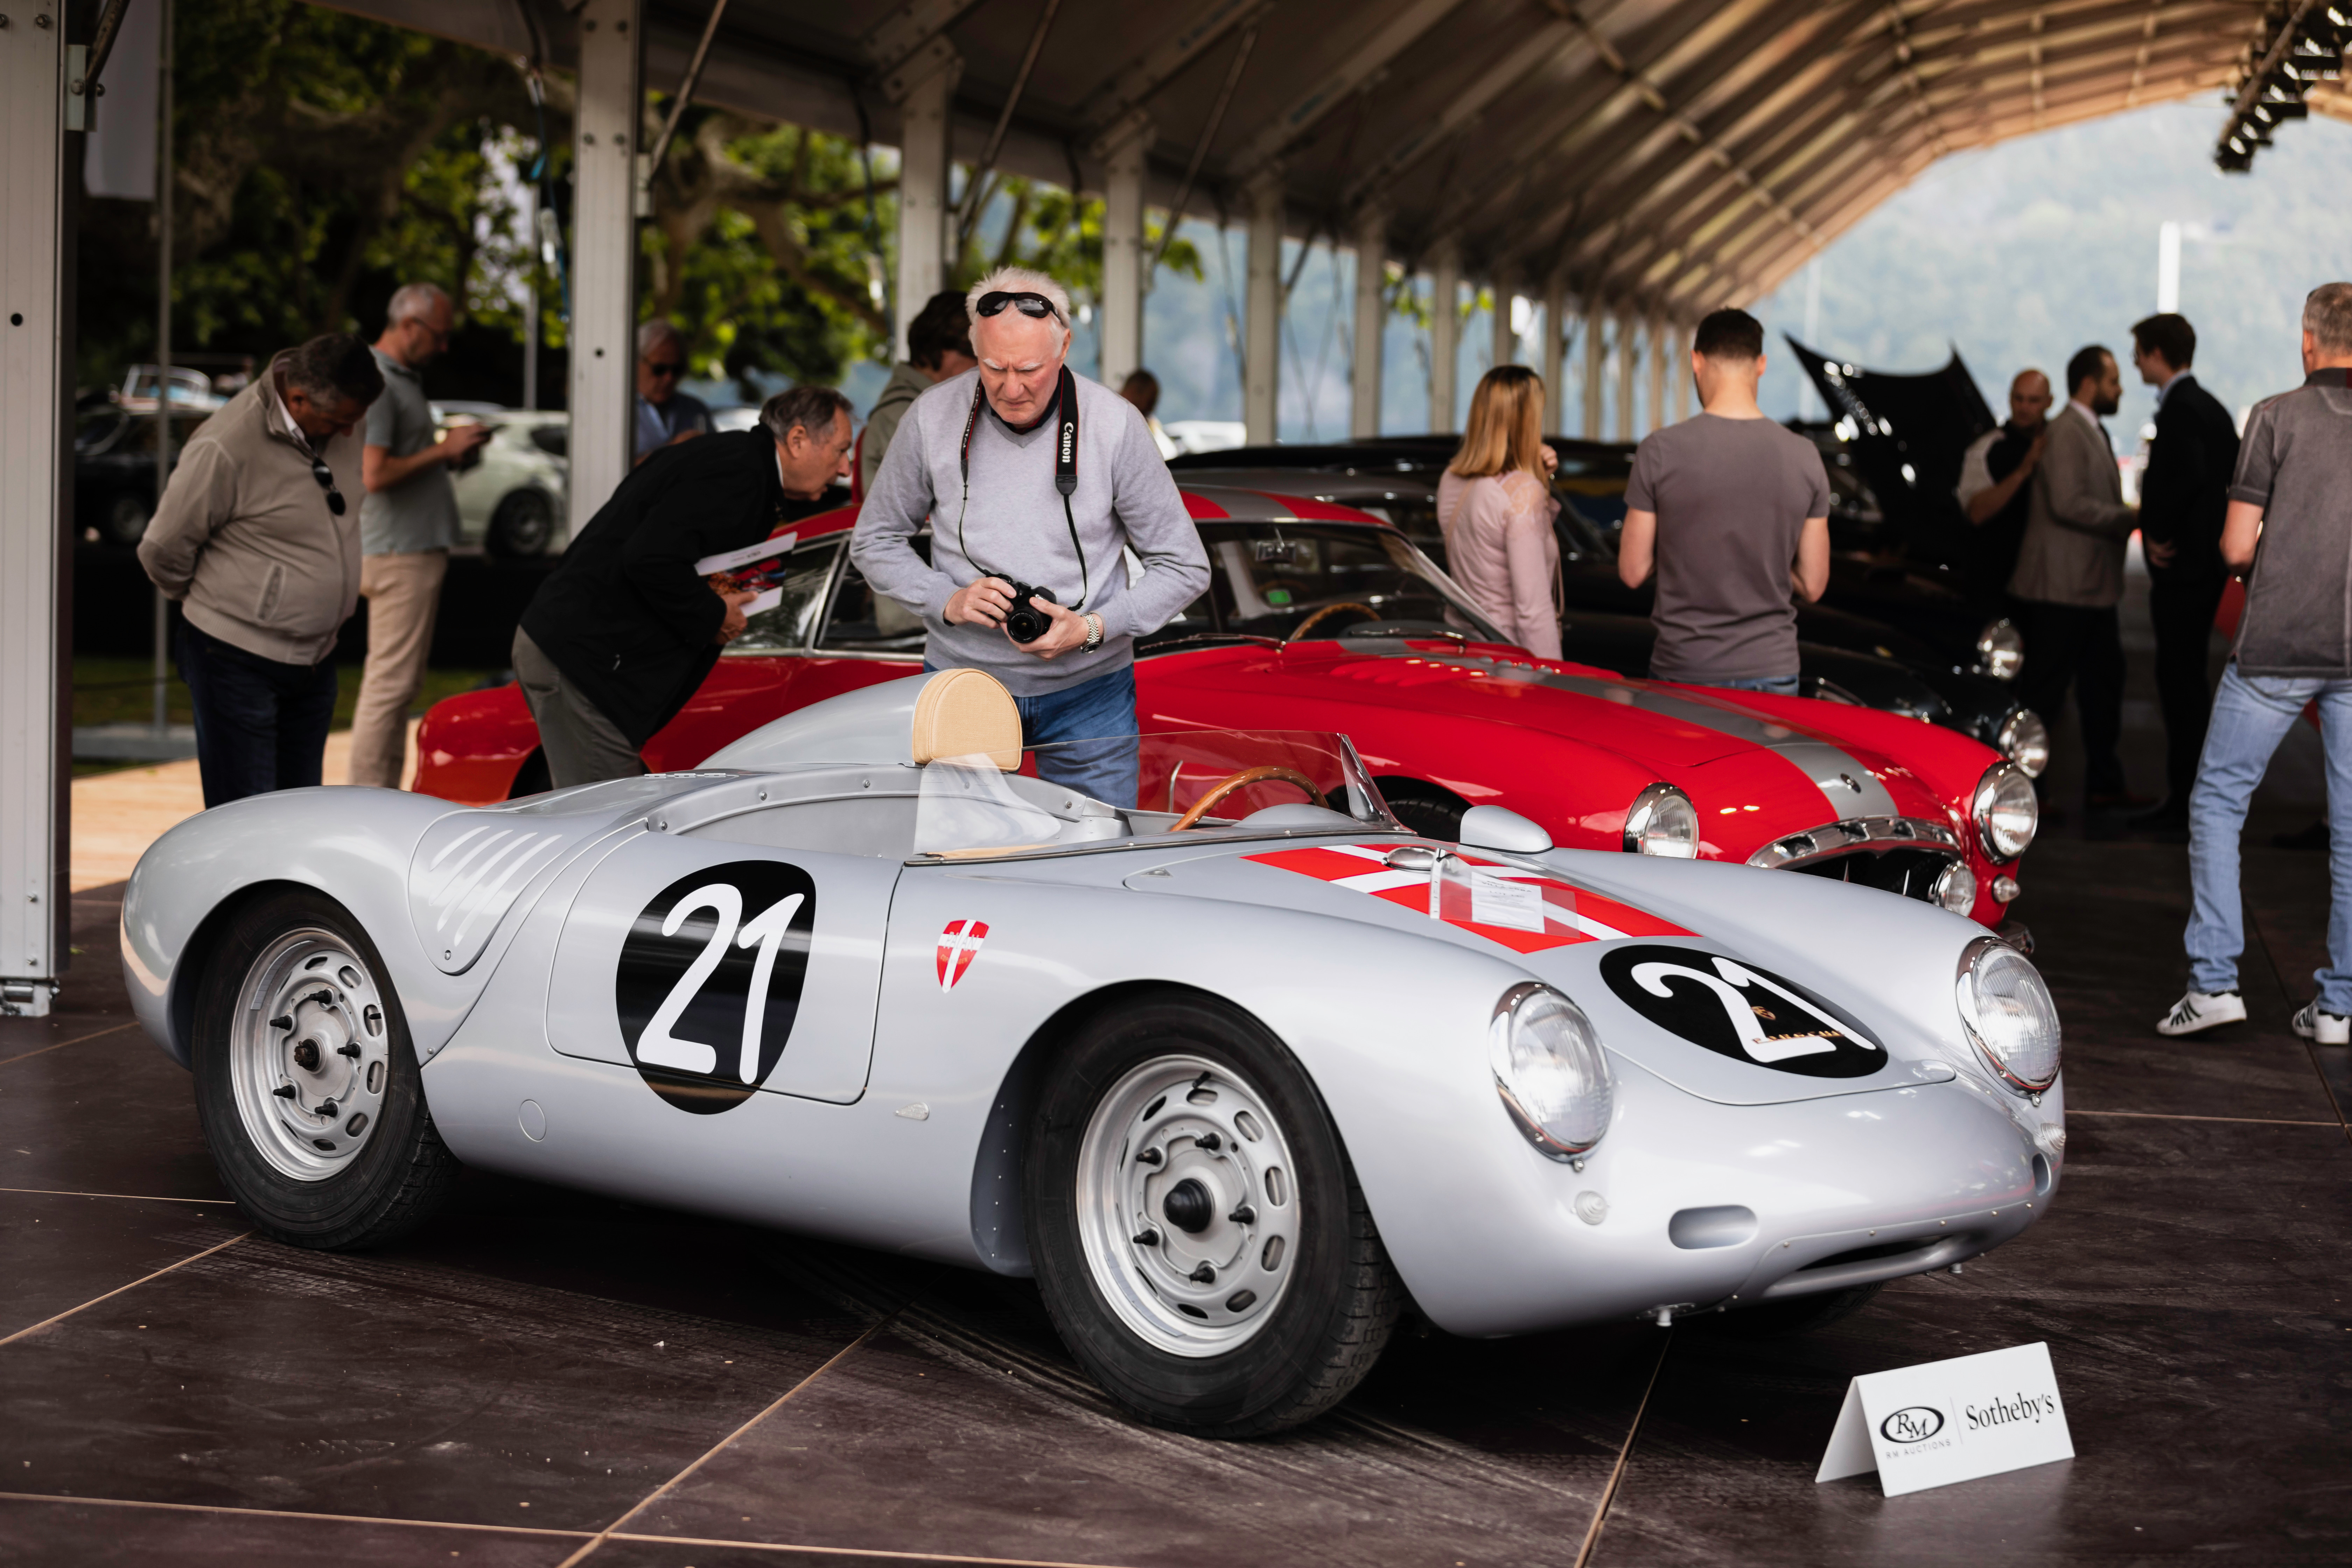 RM Sotheby's, RM Sotheby’s auction on Lake Como posts modest sell-through rate, ClassicCars.com Journal